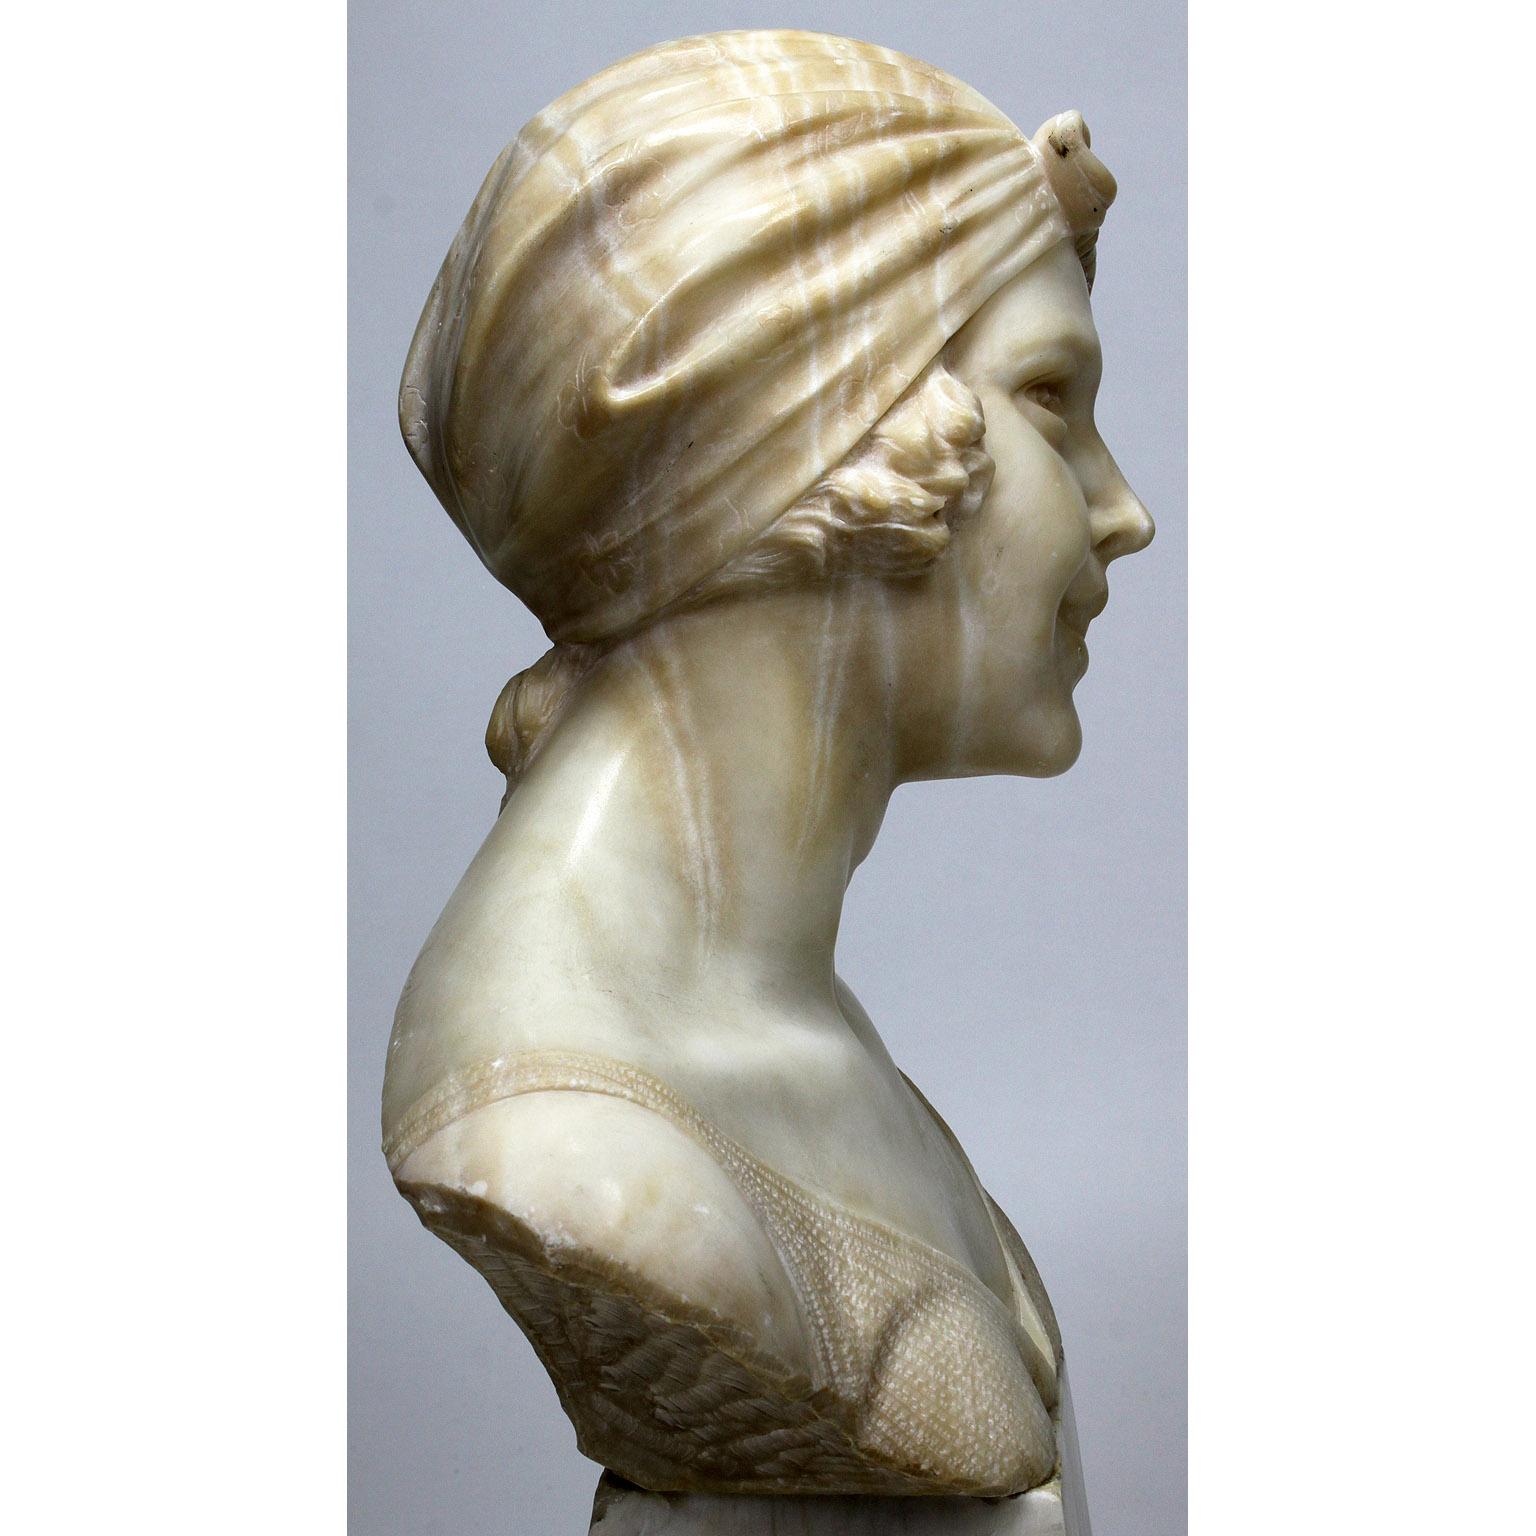  Italian 19th-20th Century Carved Alabaster Bust of a Young Girl with a Bandana For Sale 2